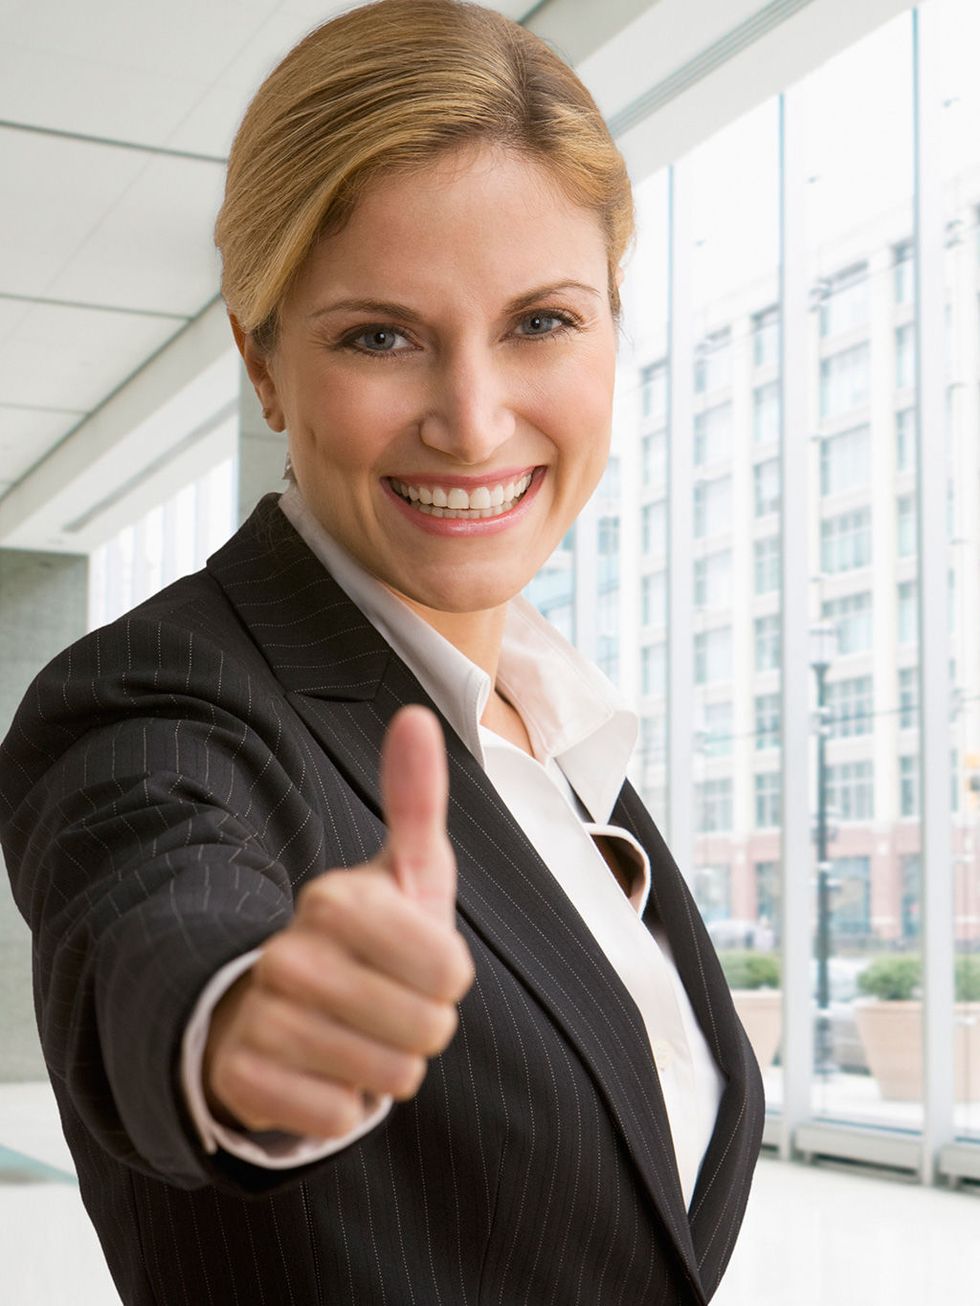 Finger, Gesture, White-collar worker, Thumb, Businessperson, Hand, Smile, Photography, Employment, Stock photography, 